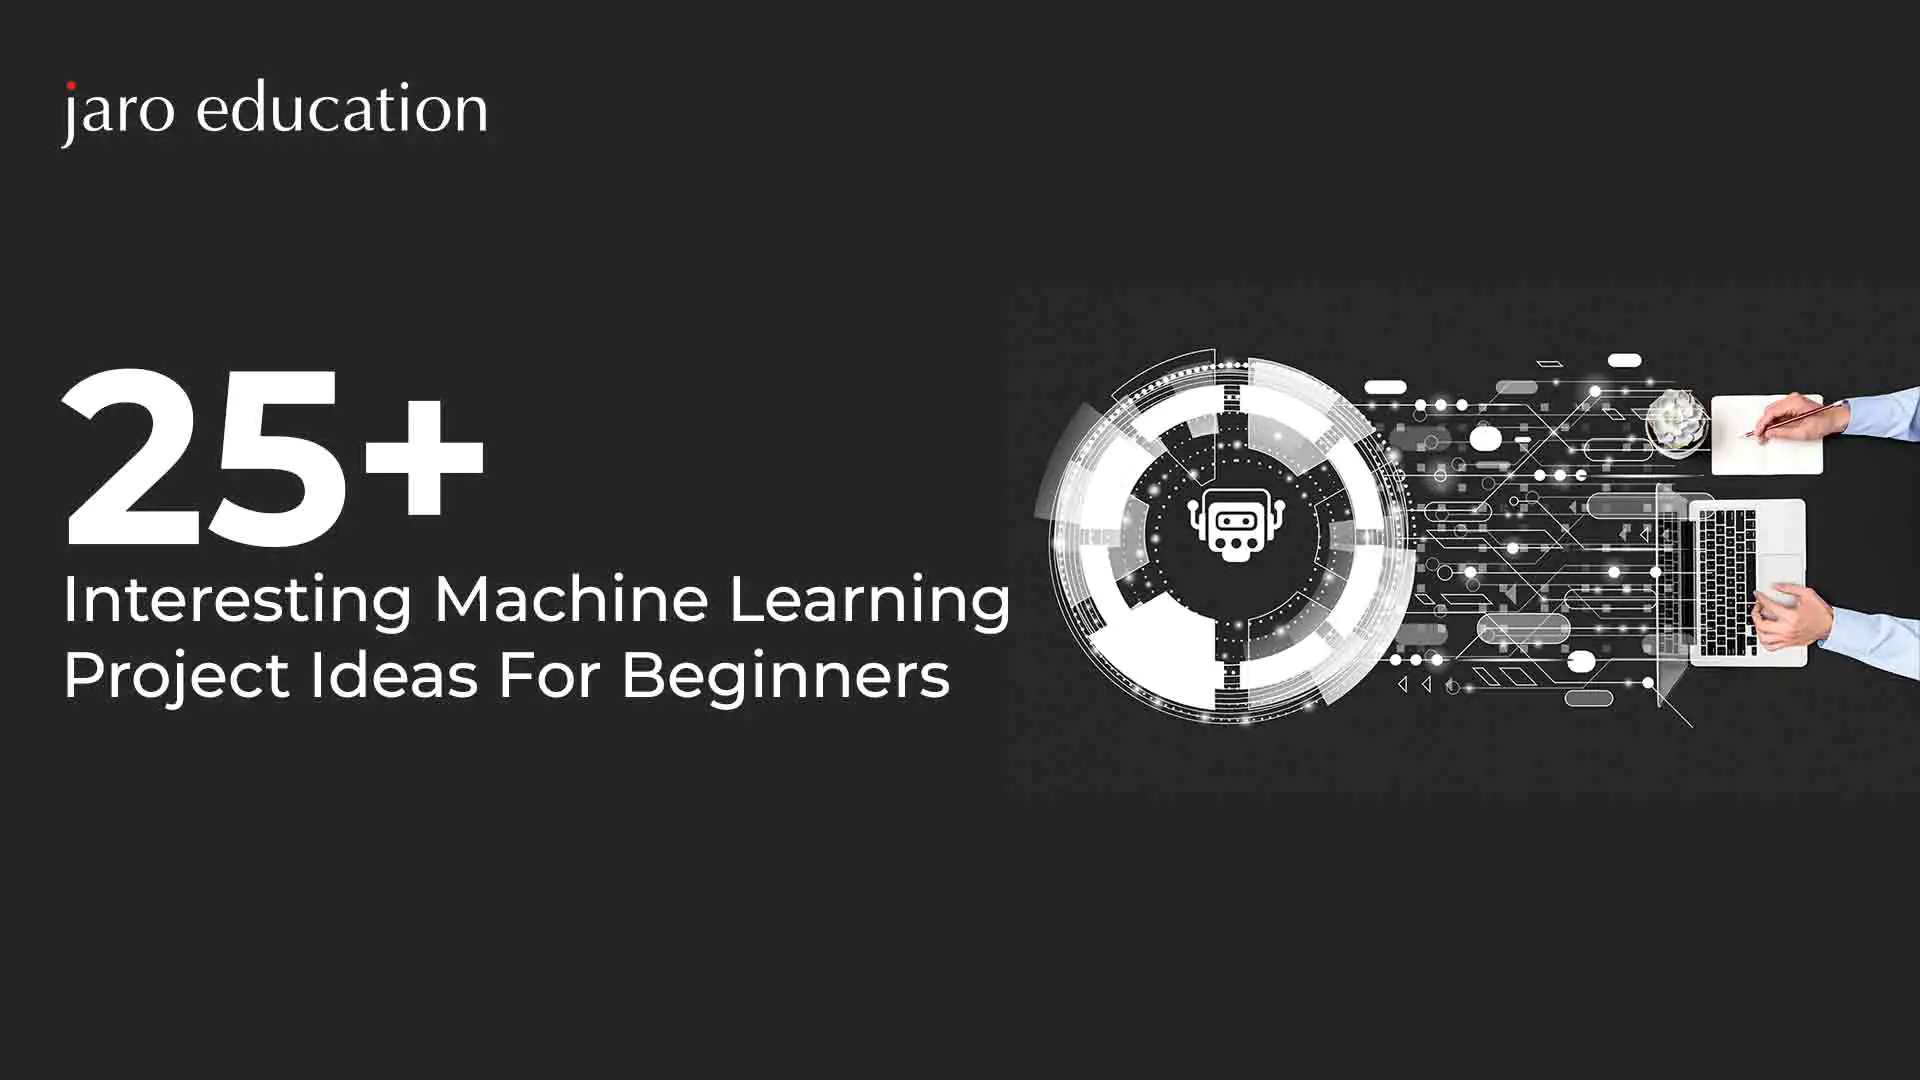 25+ Interesting Machine Learning Project Ideas For Beginners